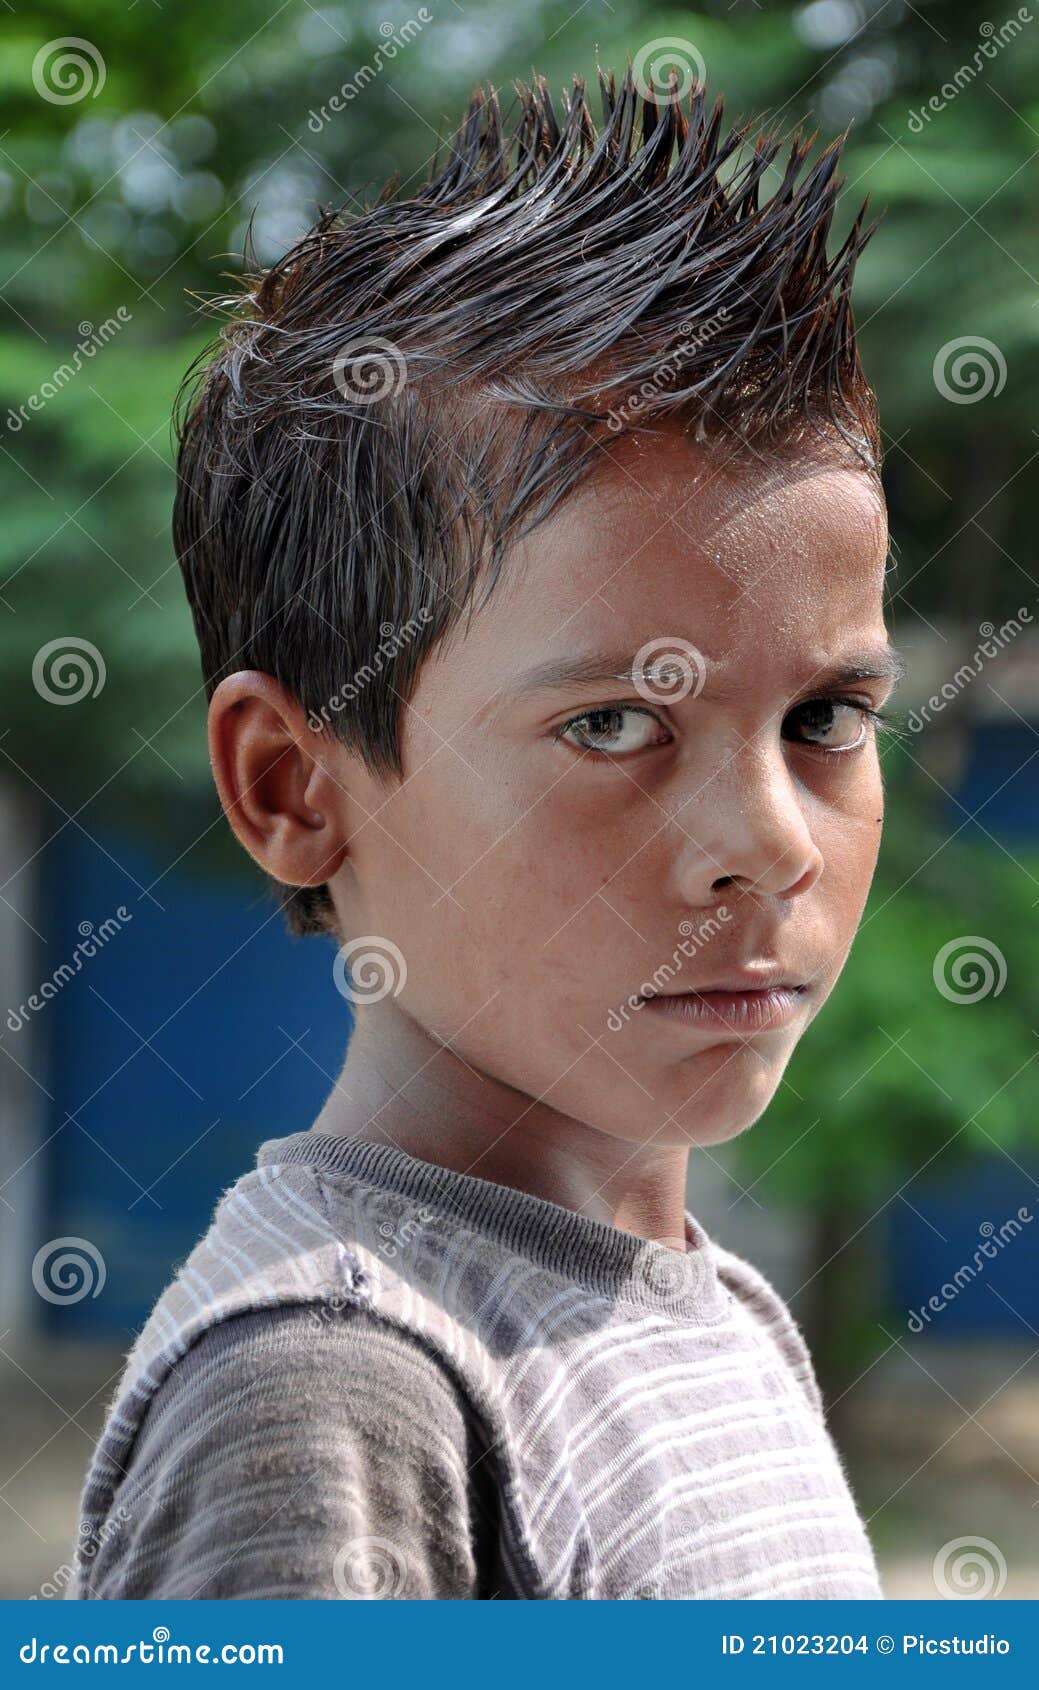 Hair spikes stock photo. Image of children, male, looks - 21023204